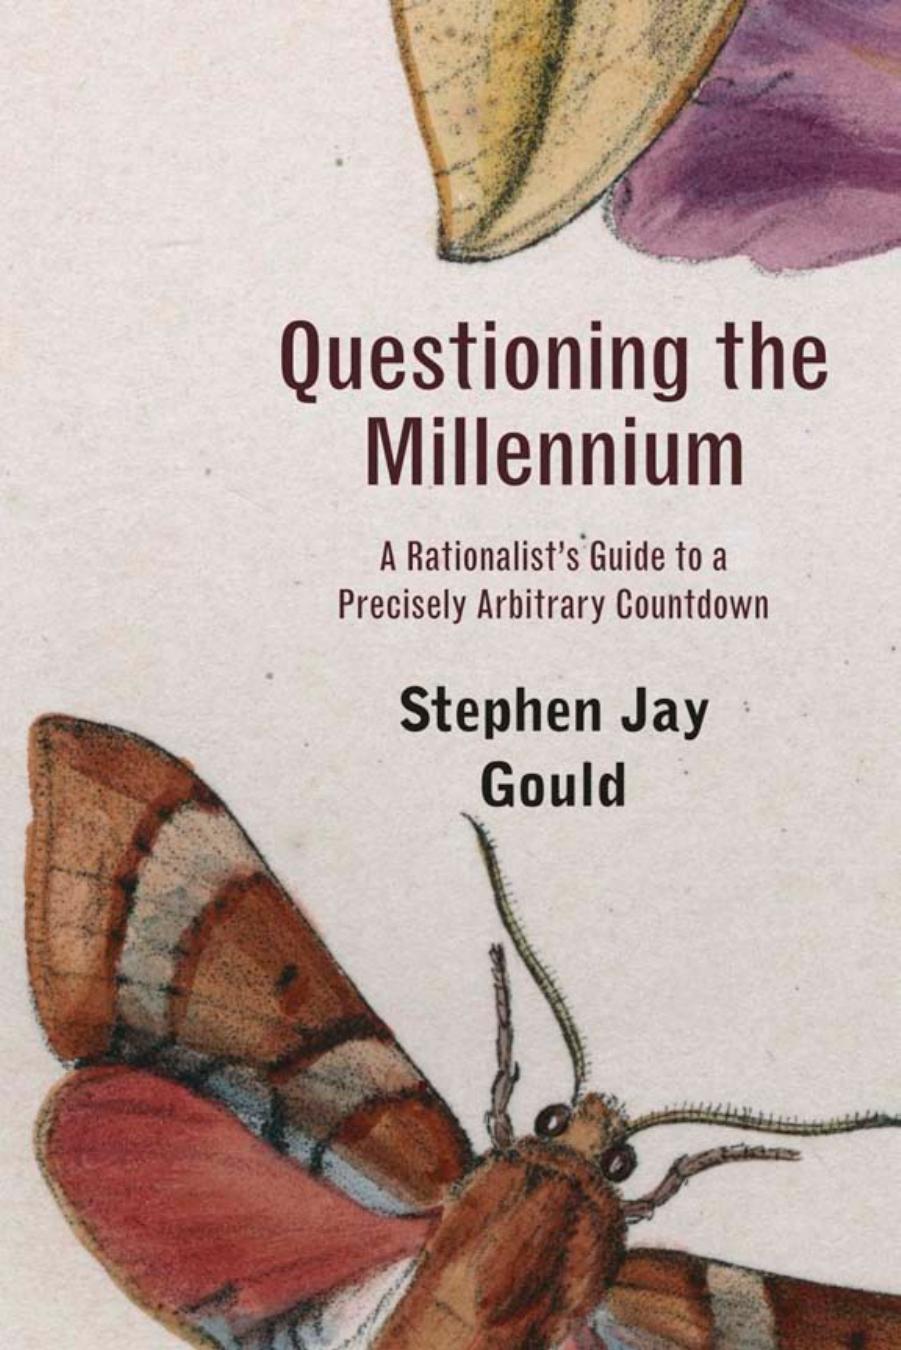 Questioning the Millennium by Stephen Jay Gould